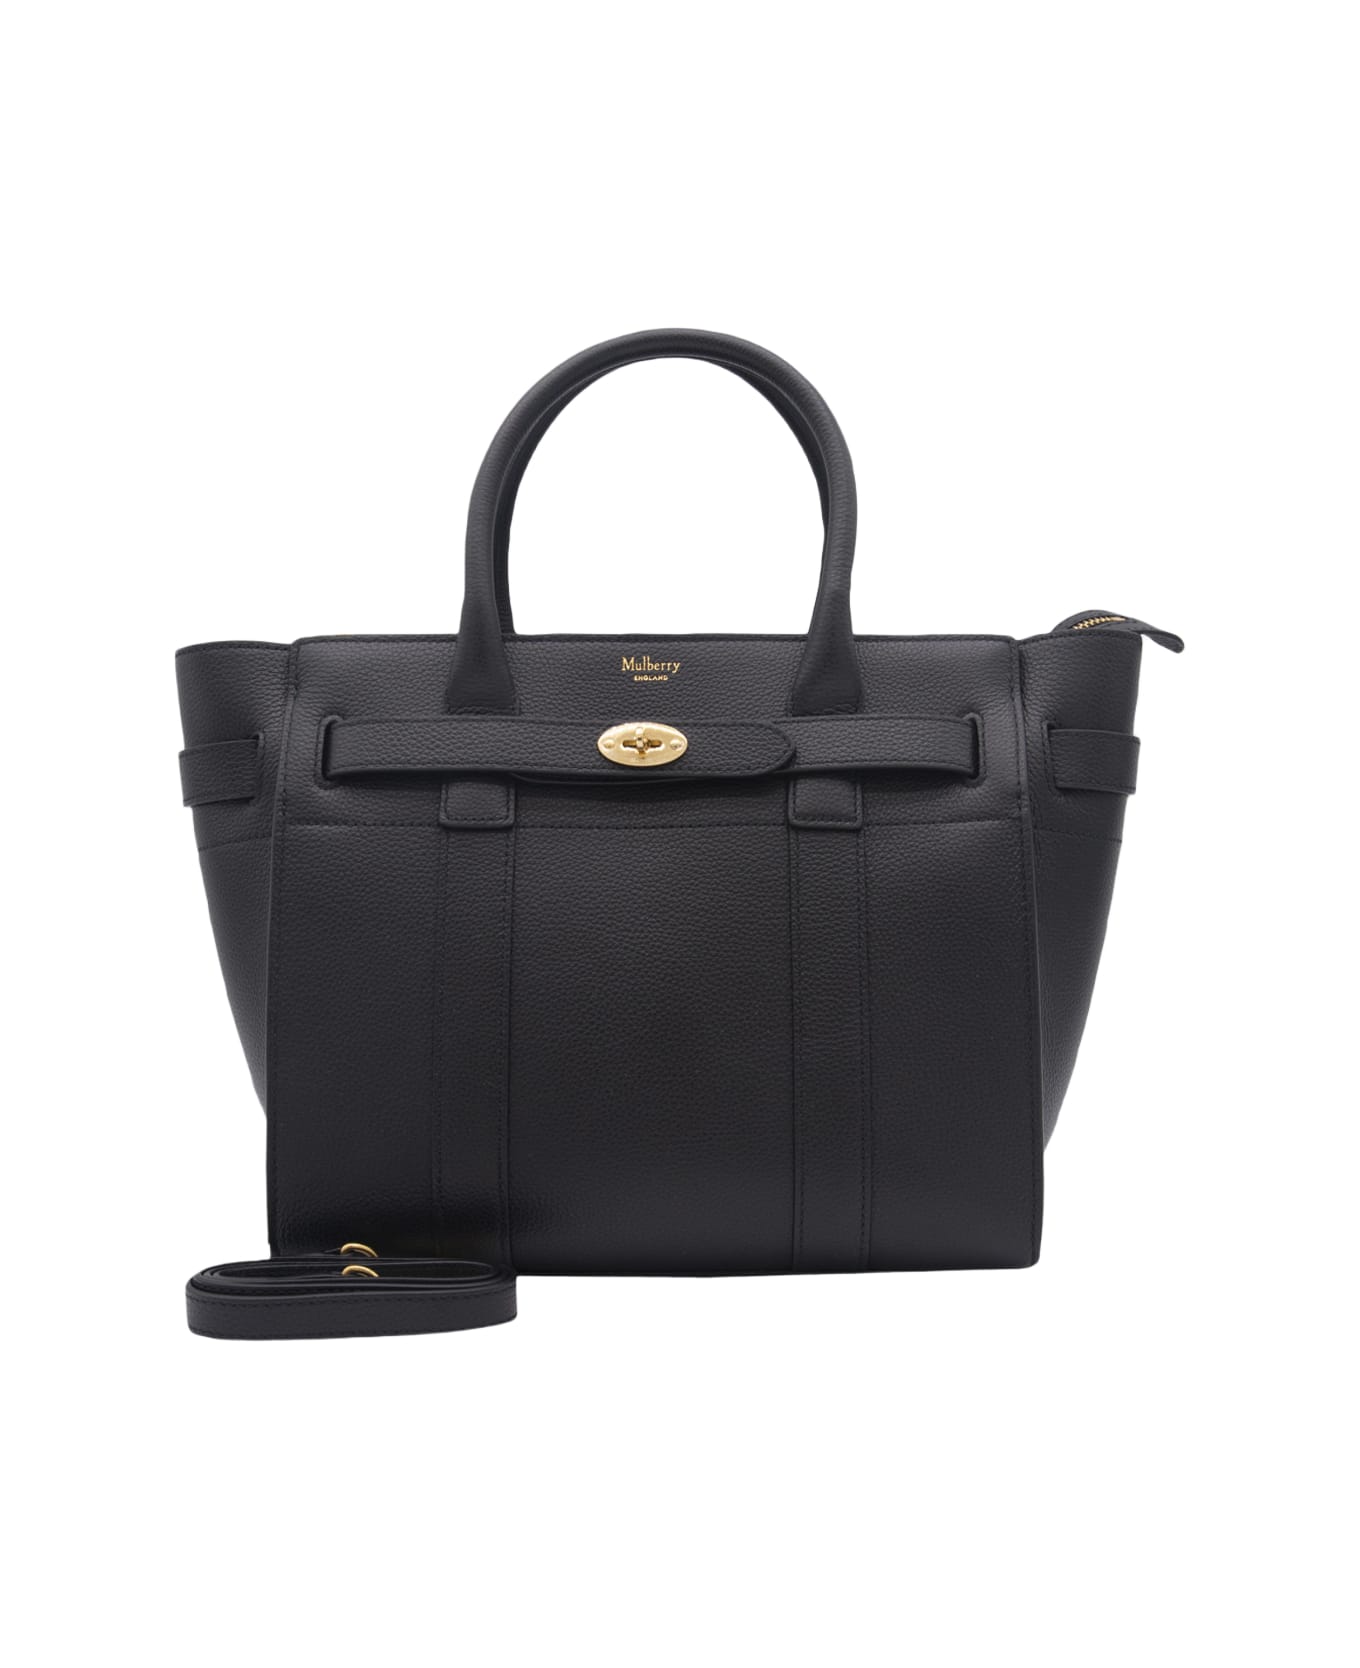 Mulberry Black Leather Tote Bag - Black トートバッグ